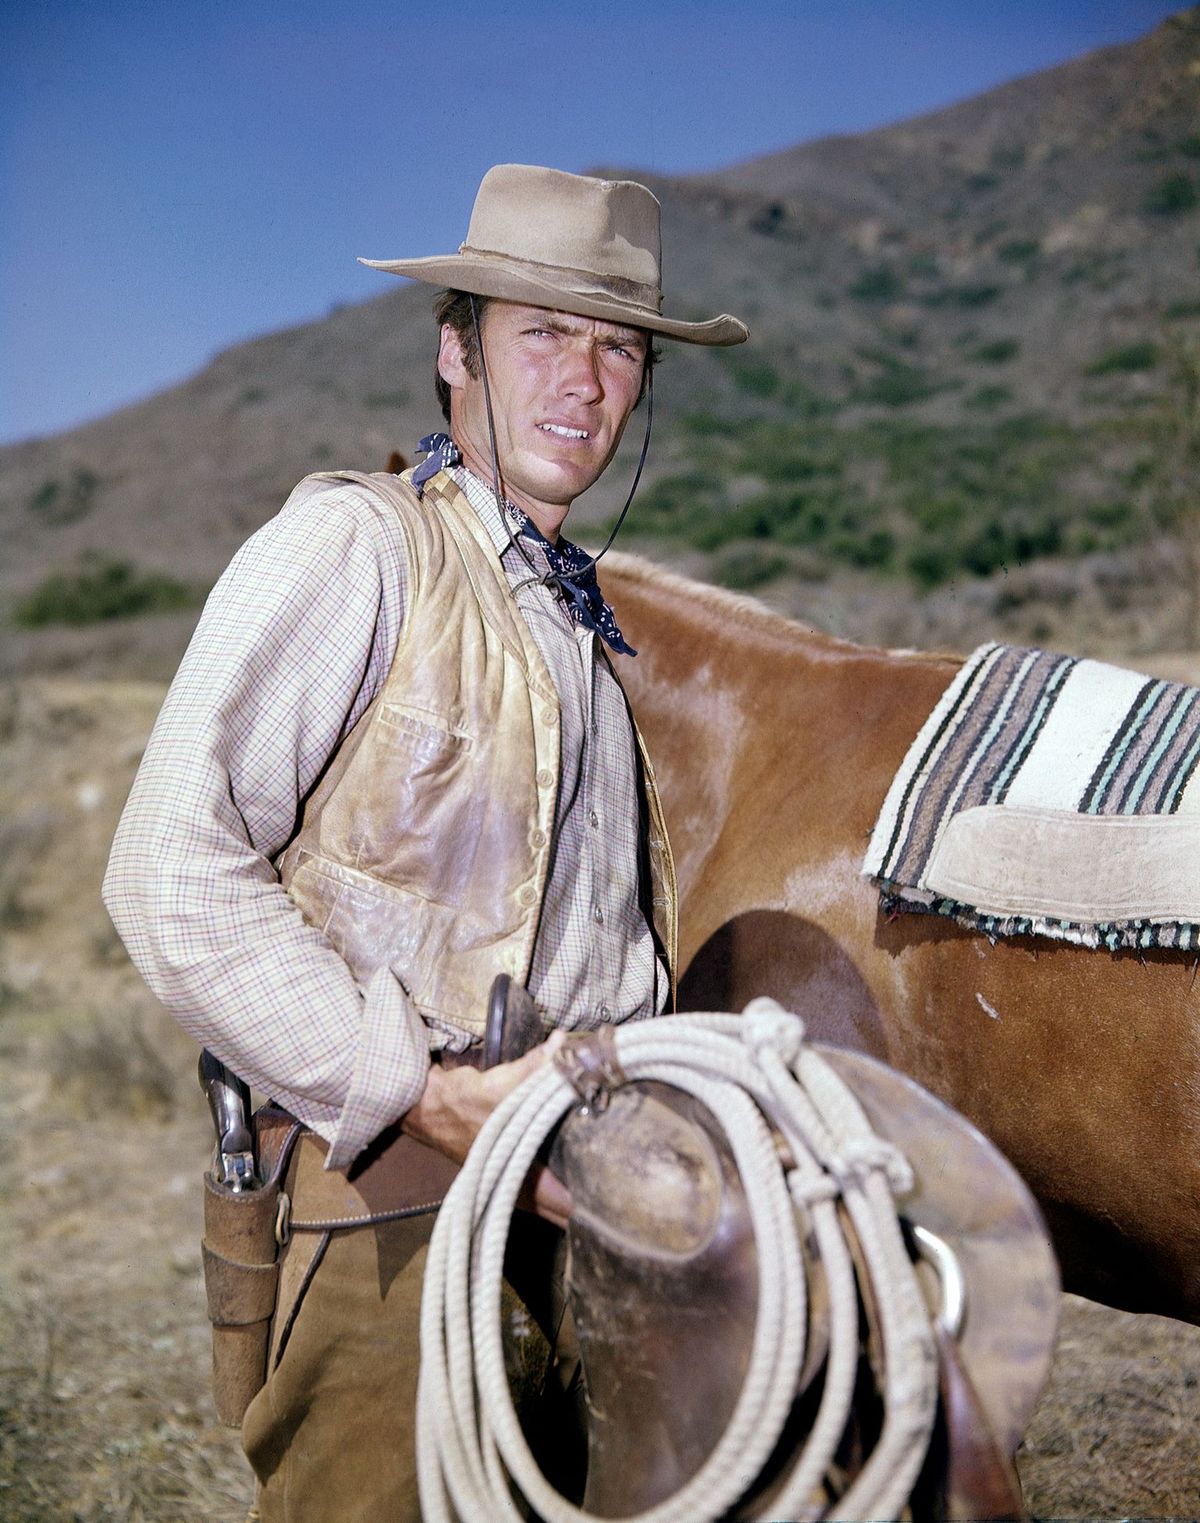 Clint Eastwood shooting the movie "Rawhide" on May 3, 1964, in Los Angeles | Photo: Tony Esparza/CBS/Getty Images